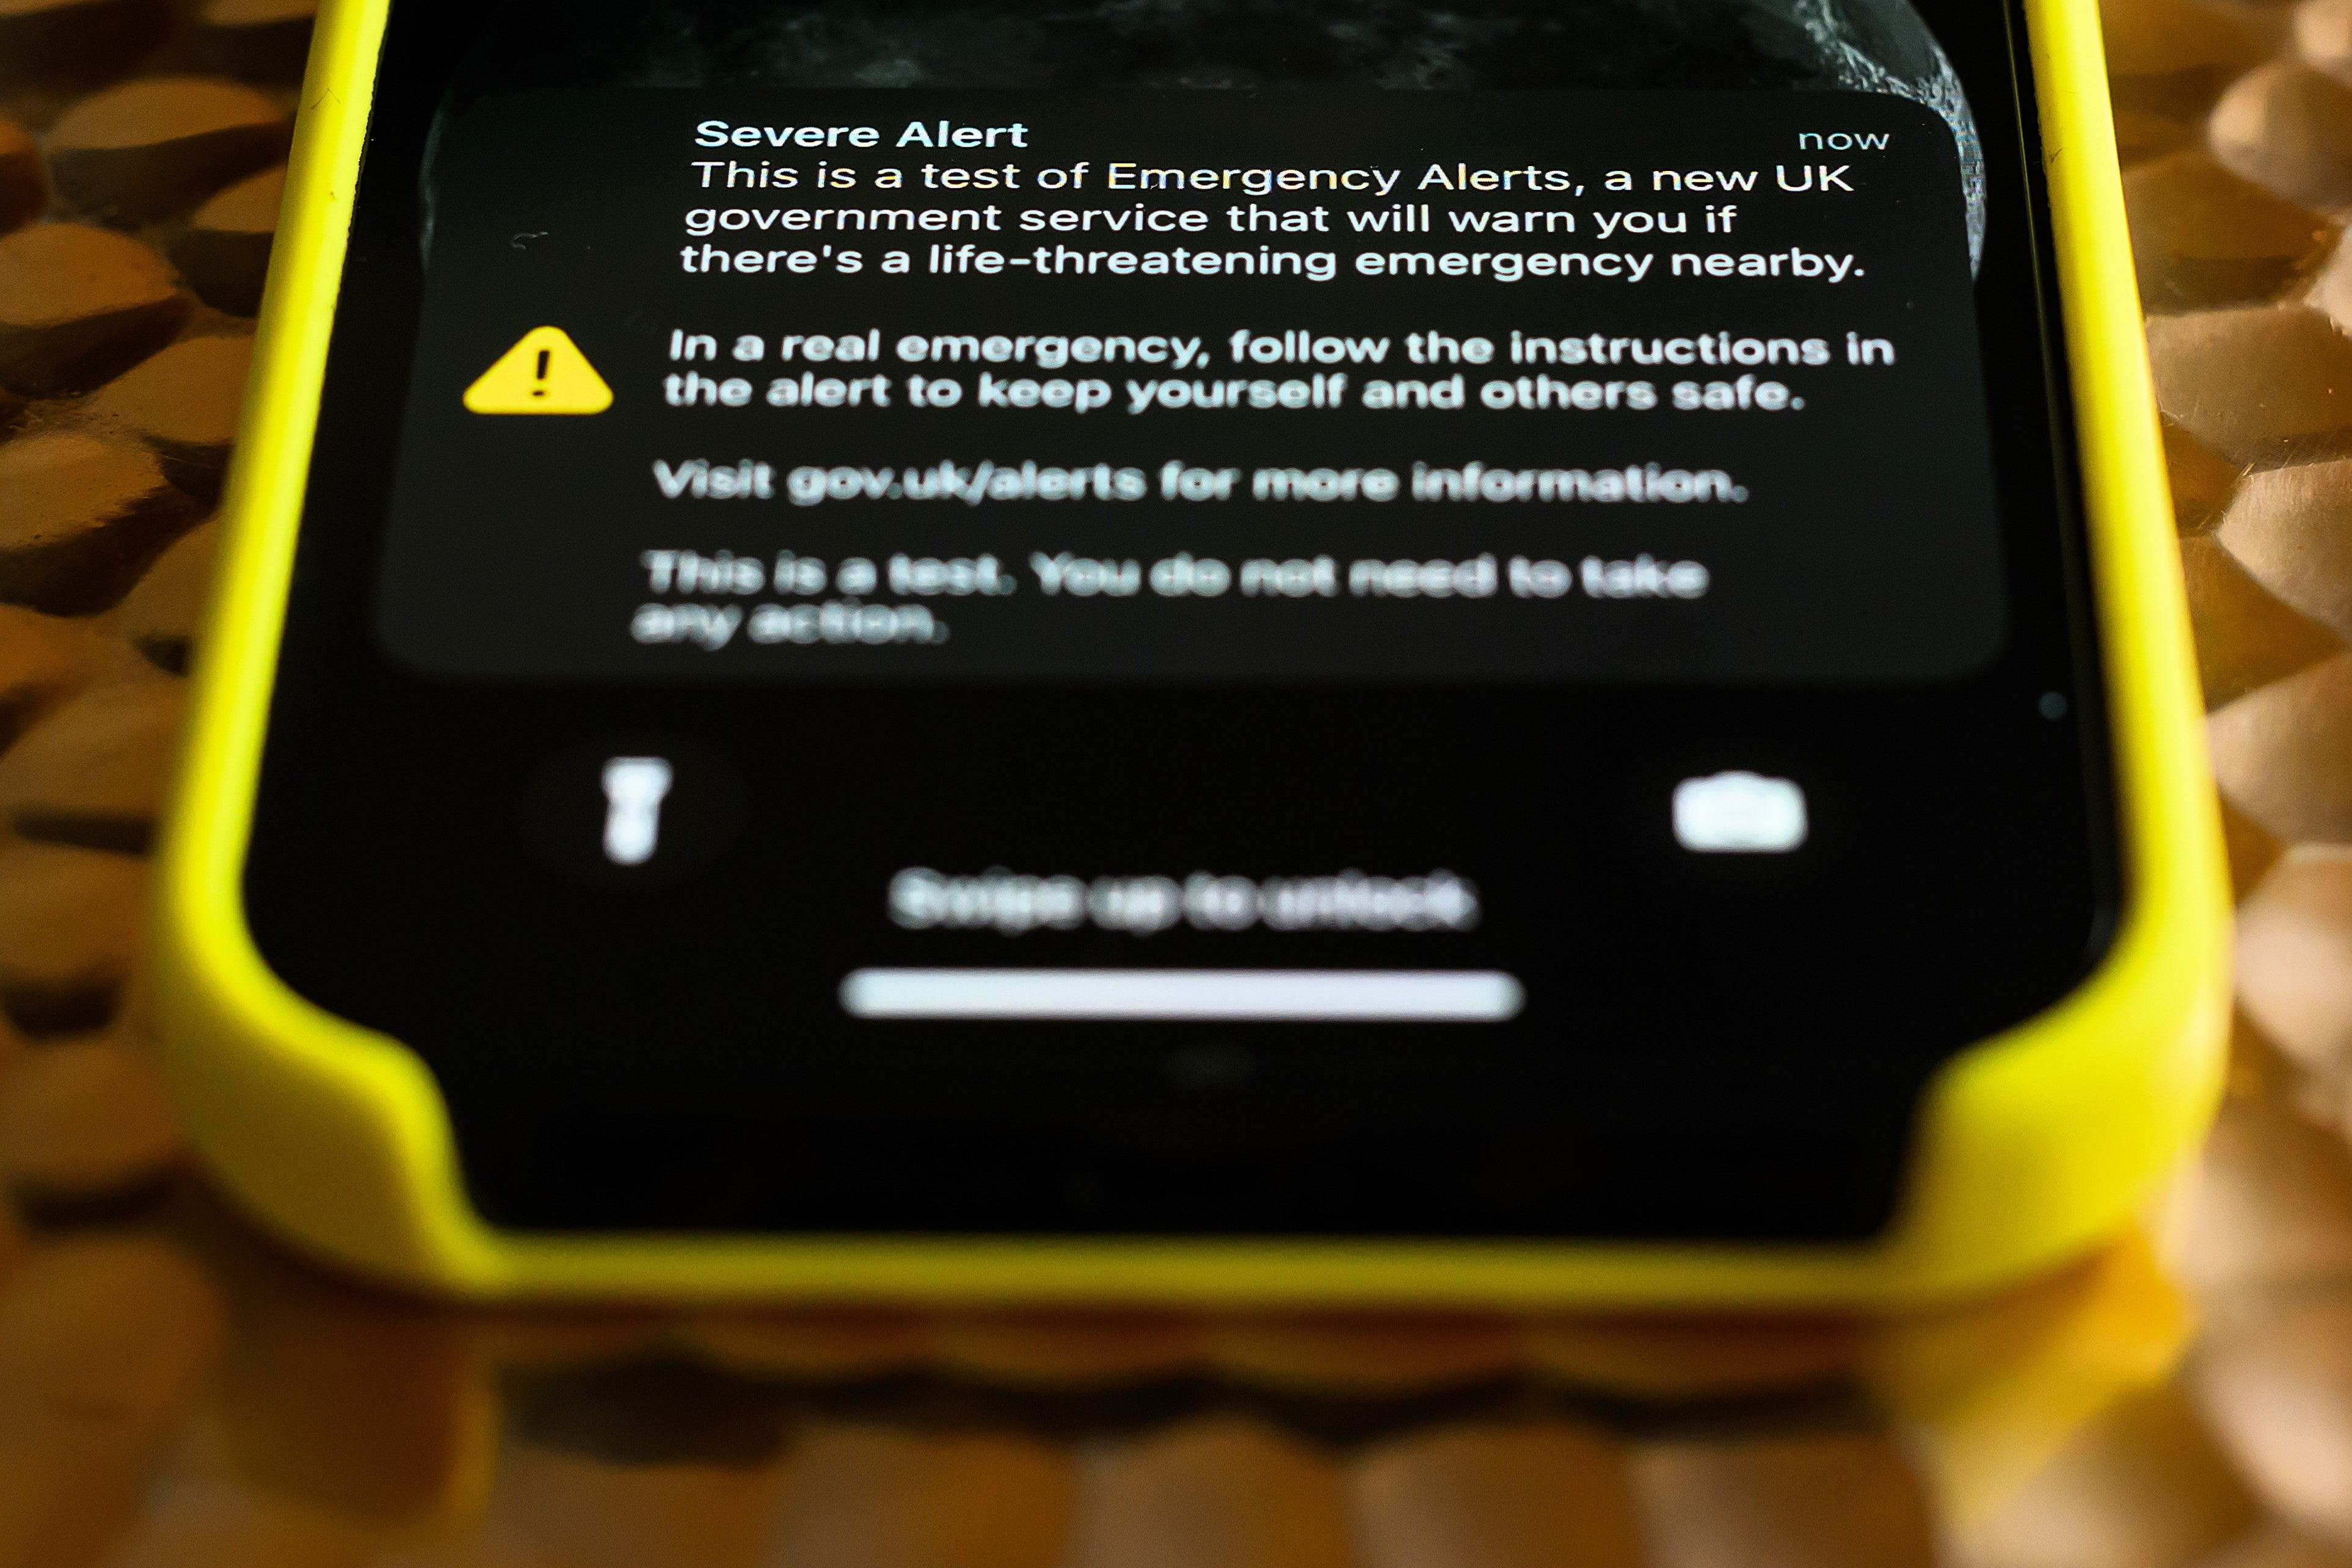 A mobile phone displays a nationwide public alert system test message on 23 April, 2023 in London, United Kingdom